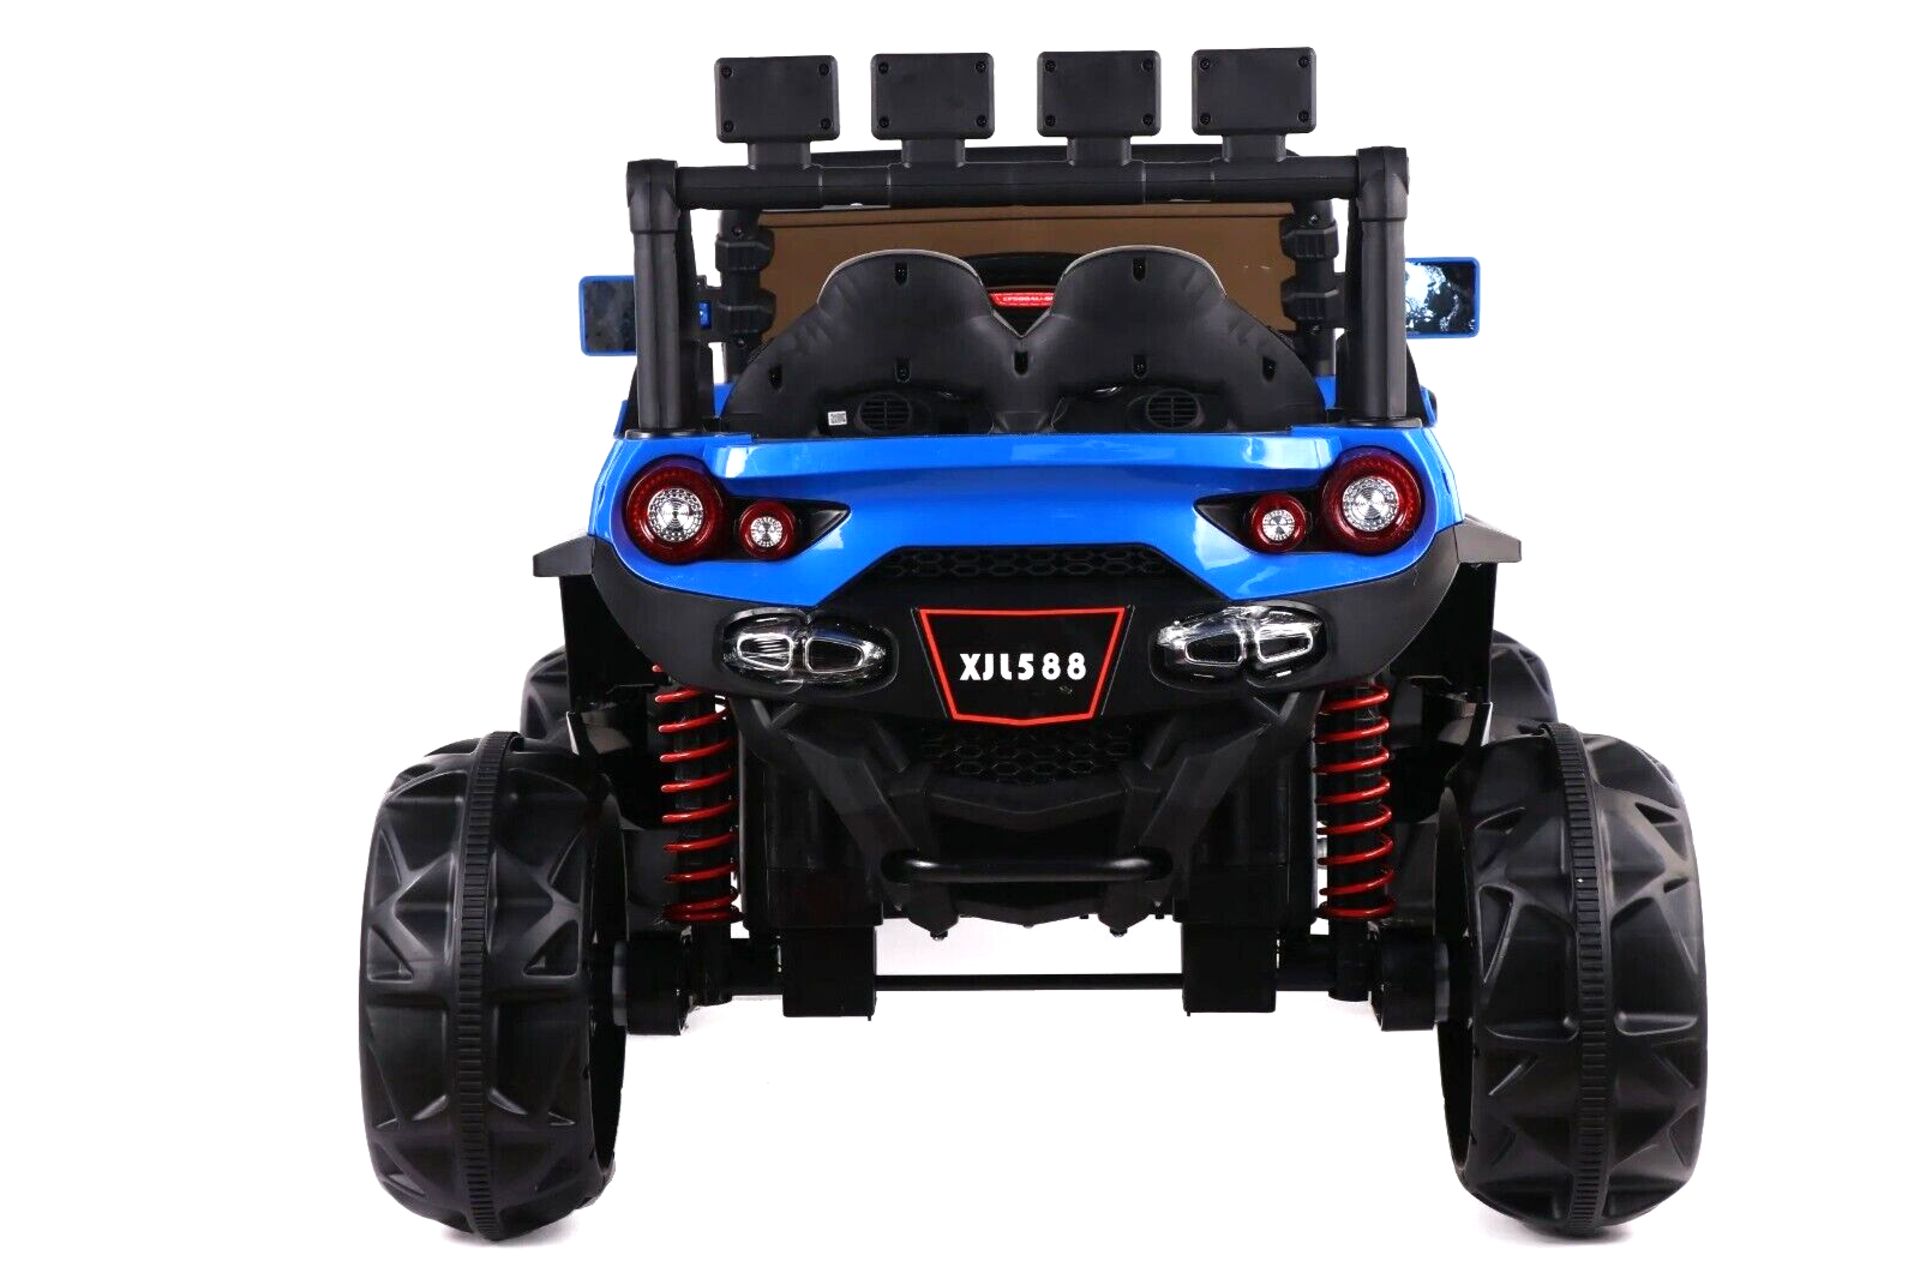 JOB LOT 5 X BLUE 4X4 ATV/UTV KIDS BUGGY JEEP ELECTRIC CAR WITH REMOTE BRAND NEW BOXED - Image 4 of 5